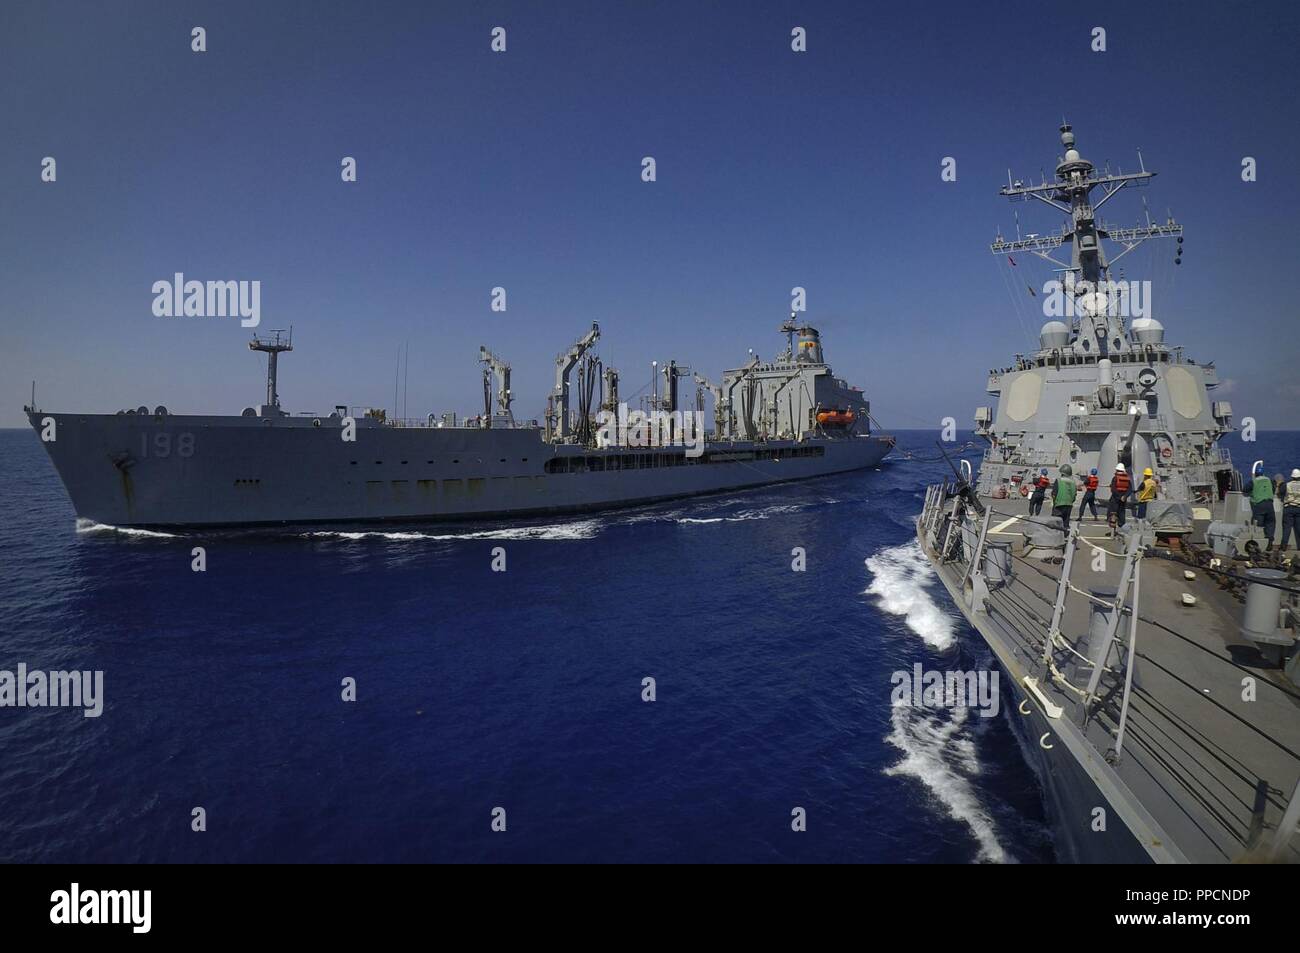 SEA (Aug. 30, 2018) The Arleigh Burke-class guided-missile destroyer USS Carney (DDG 64) conducts a replenishment at sea with the fleet replenishment oiler USNS Big Horn (T-AO 198) Aug. 30, 2018. Carney, forward-deployed to Rota, Spain, is on its fifth patrol in the U.S. 6th Fleet area of operations in support of regional allies and partners as well as U.S. national security interests in Europe and Africa. Stock Photo